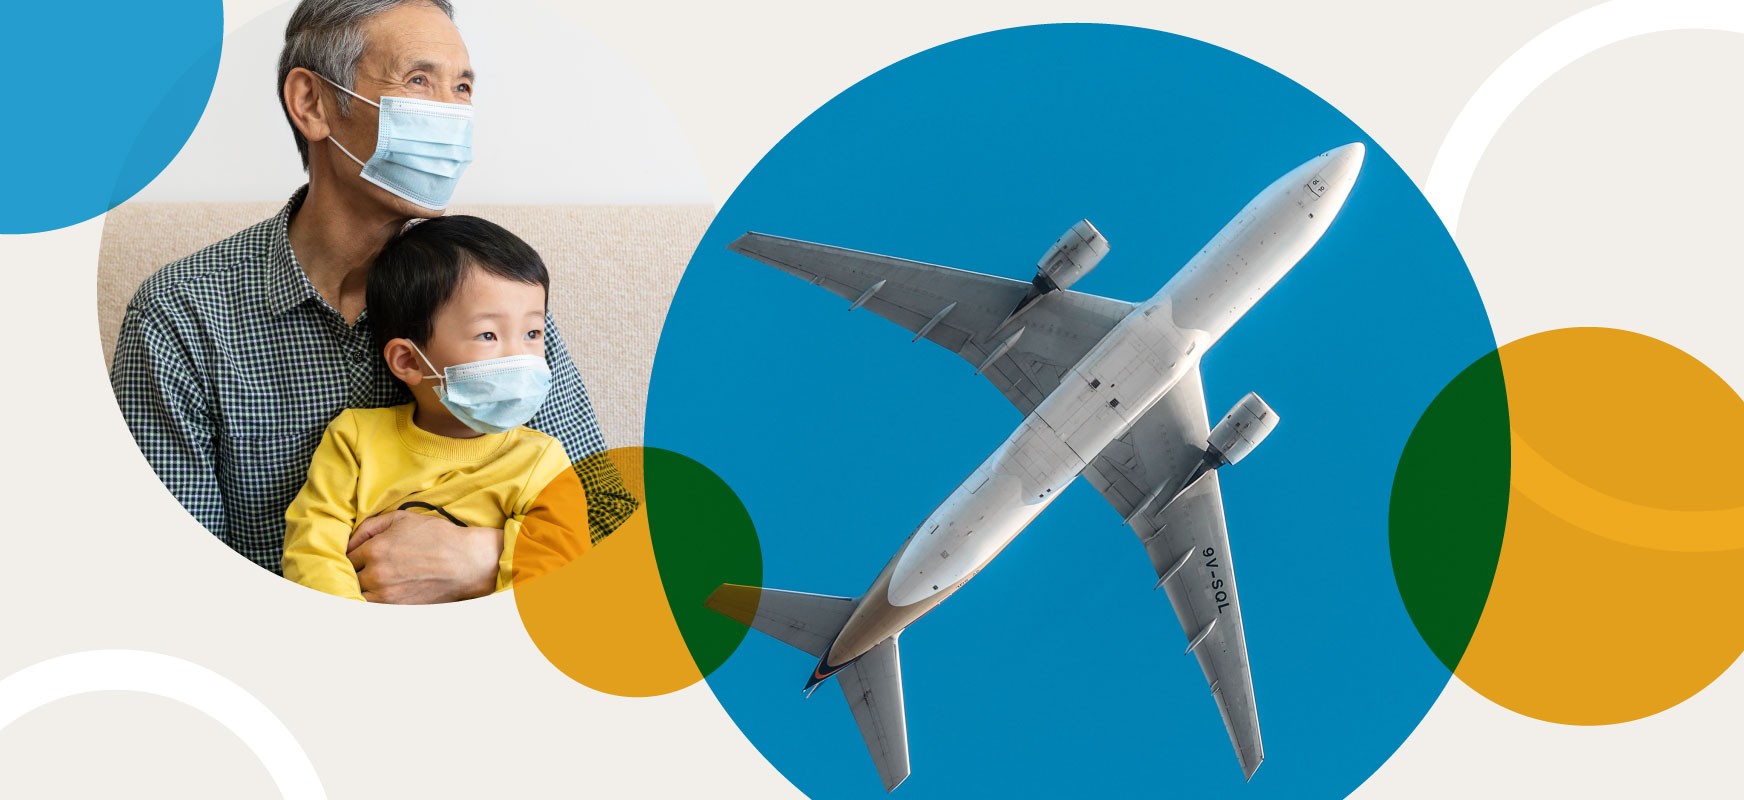 An illustration showing life after the COVID-19 vaccine, including children visiting with grandparents and a plane leaving for a vacation destination